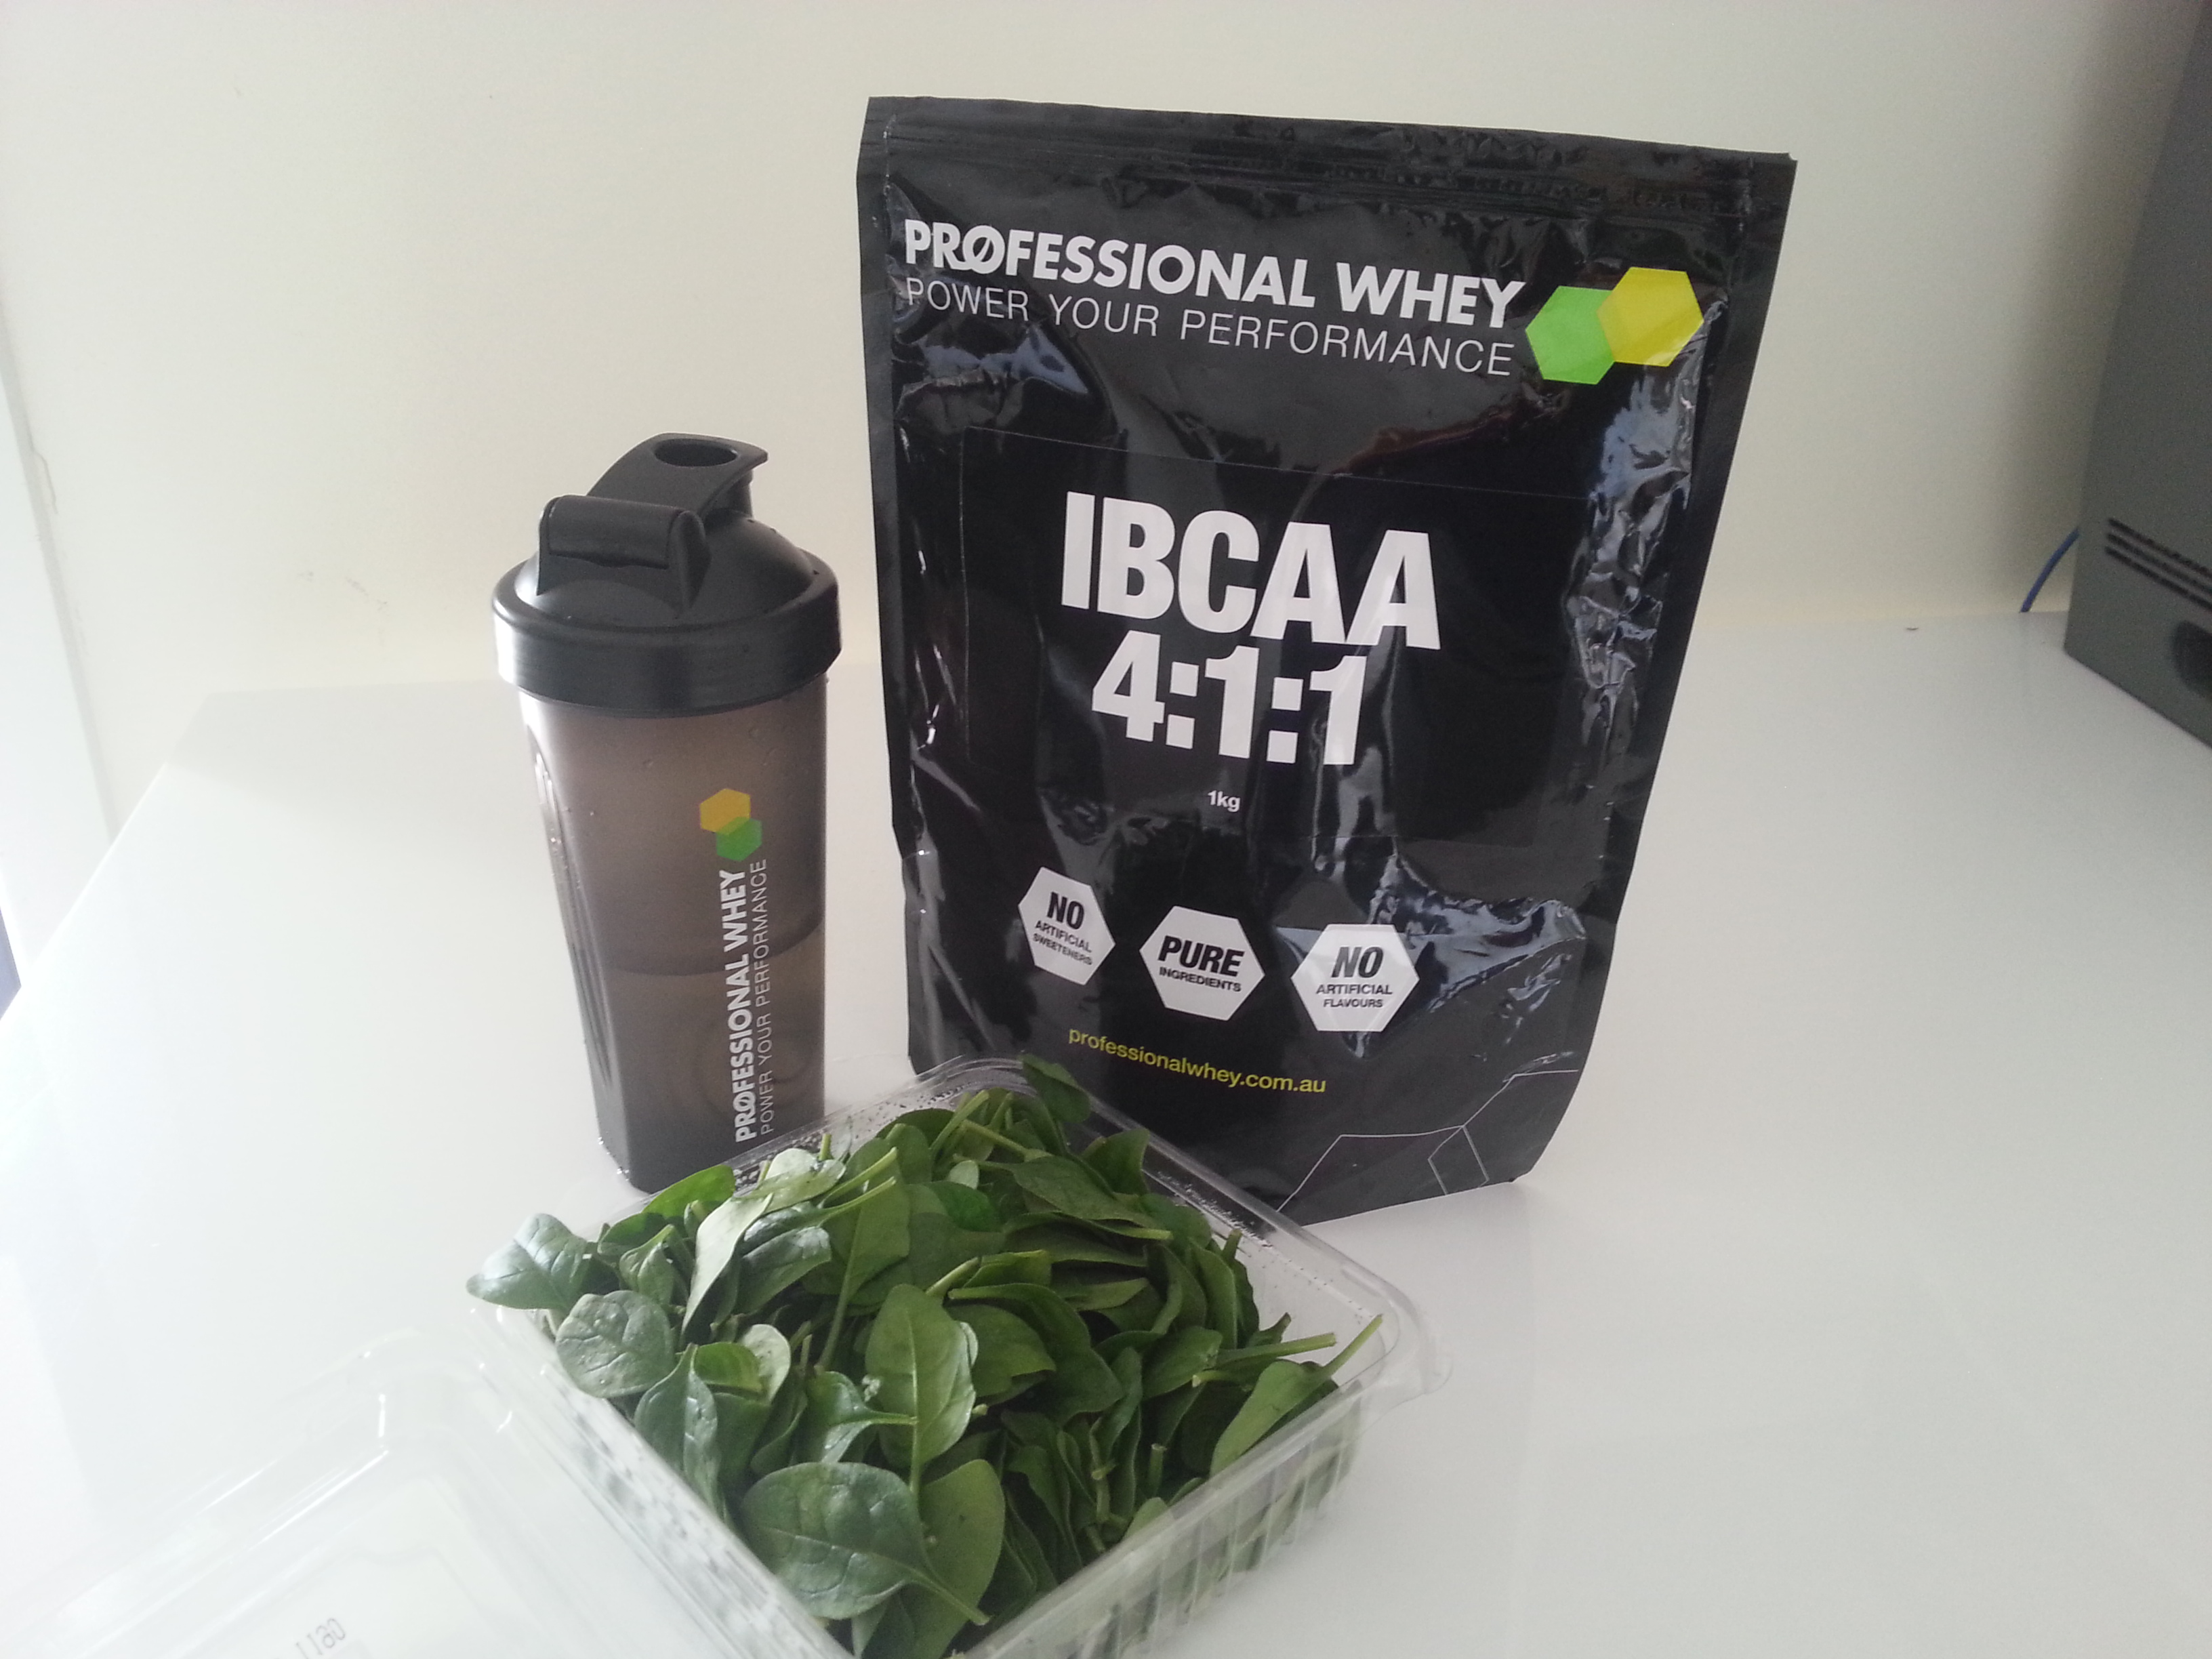 Spinach and BCAA's